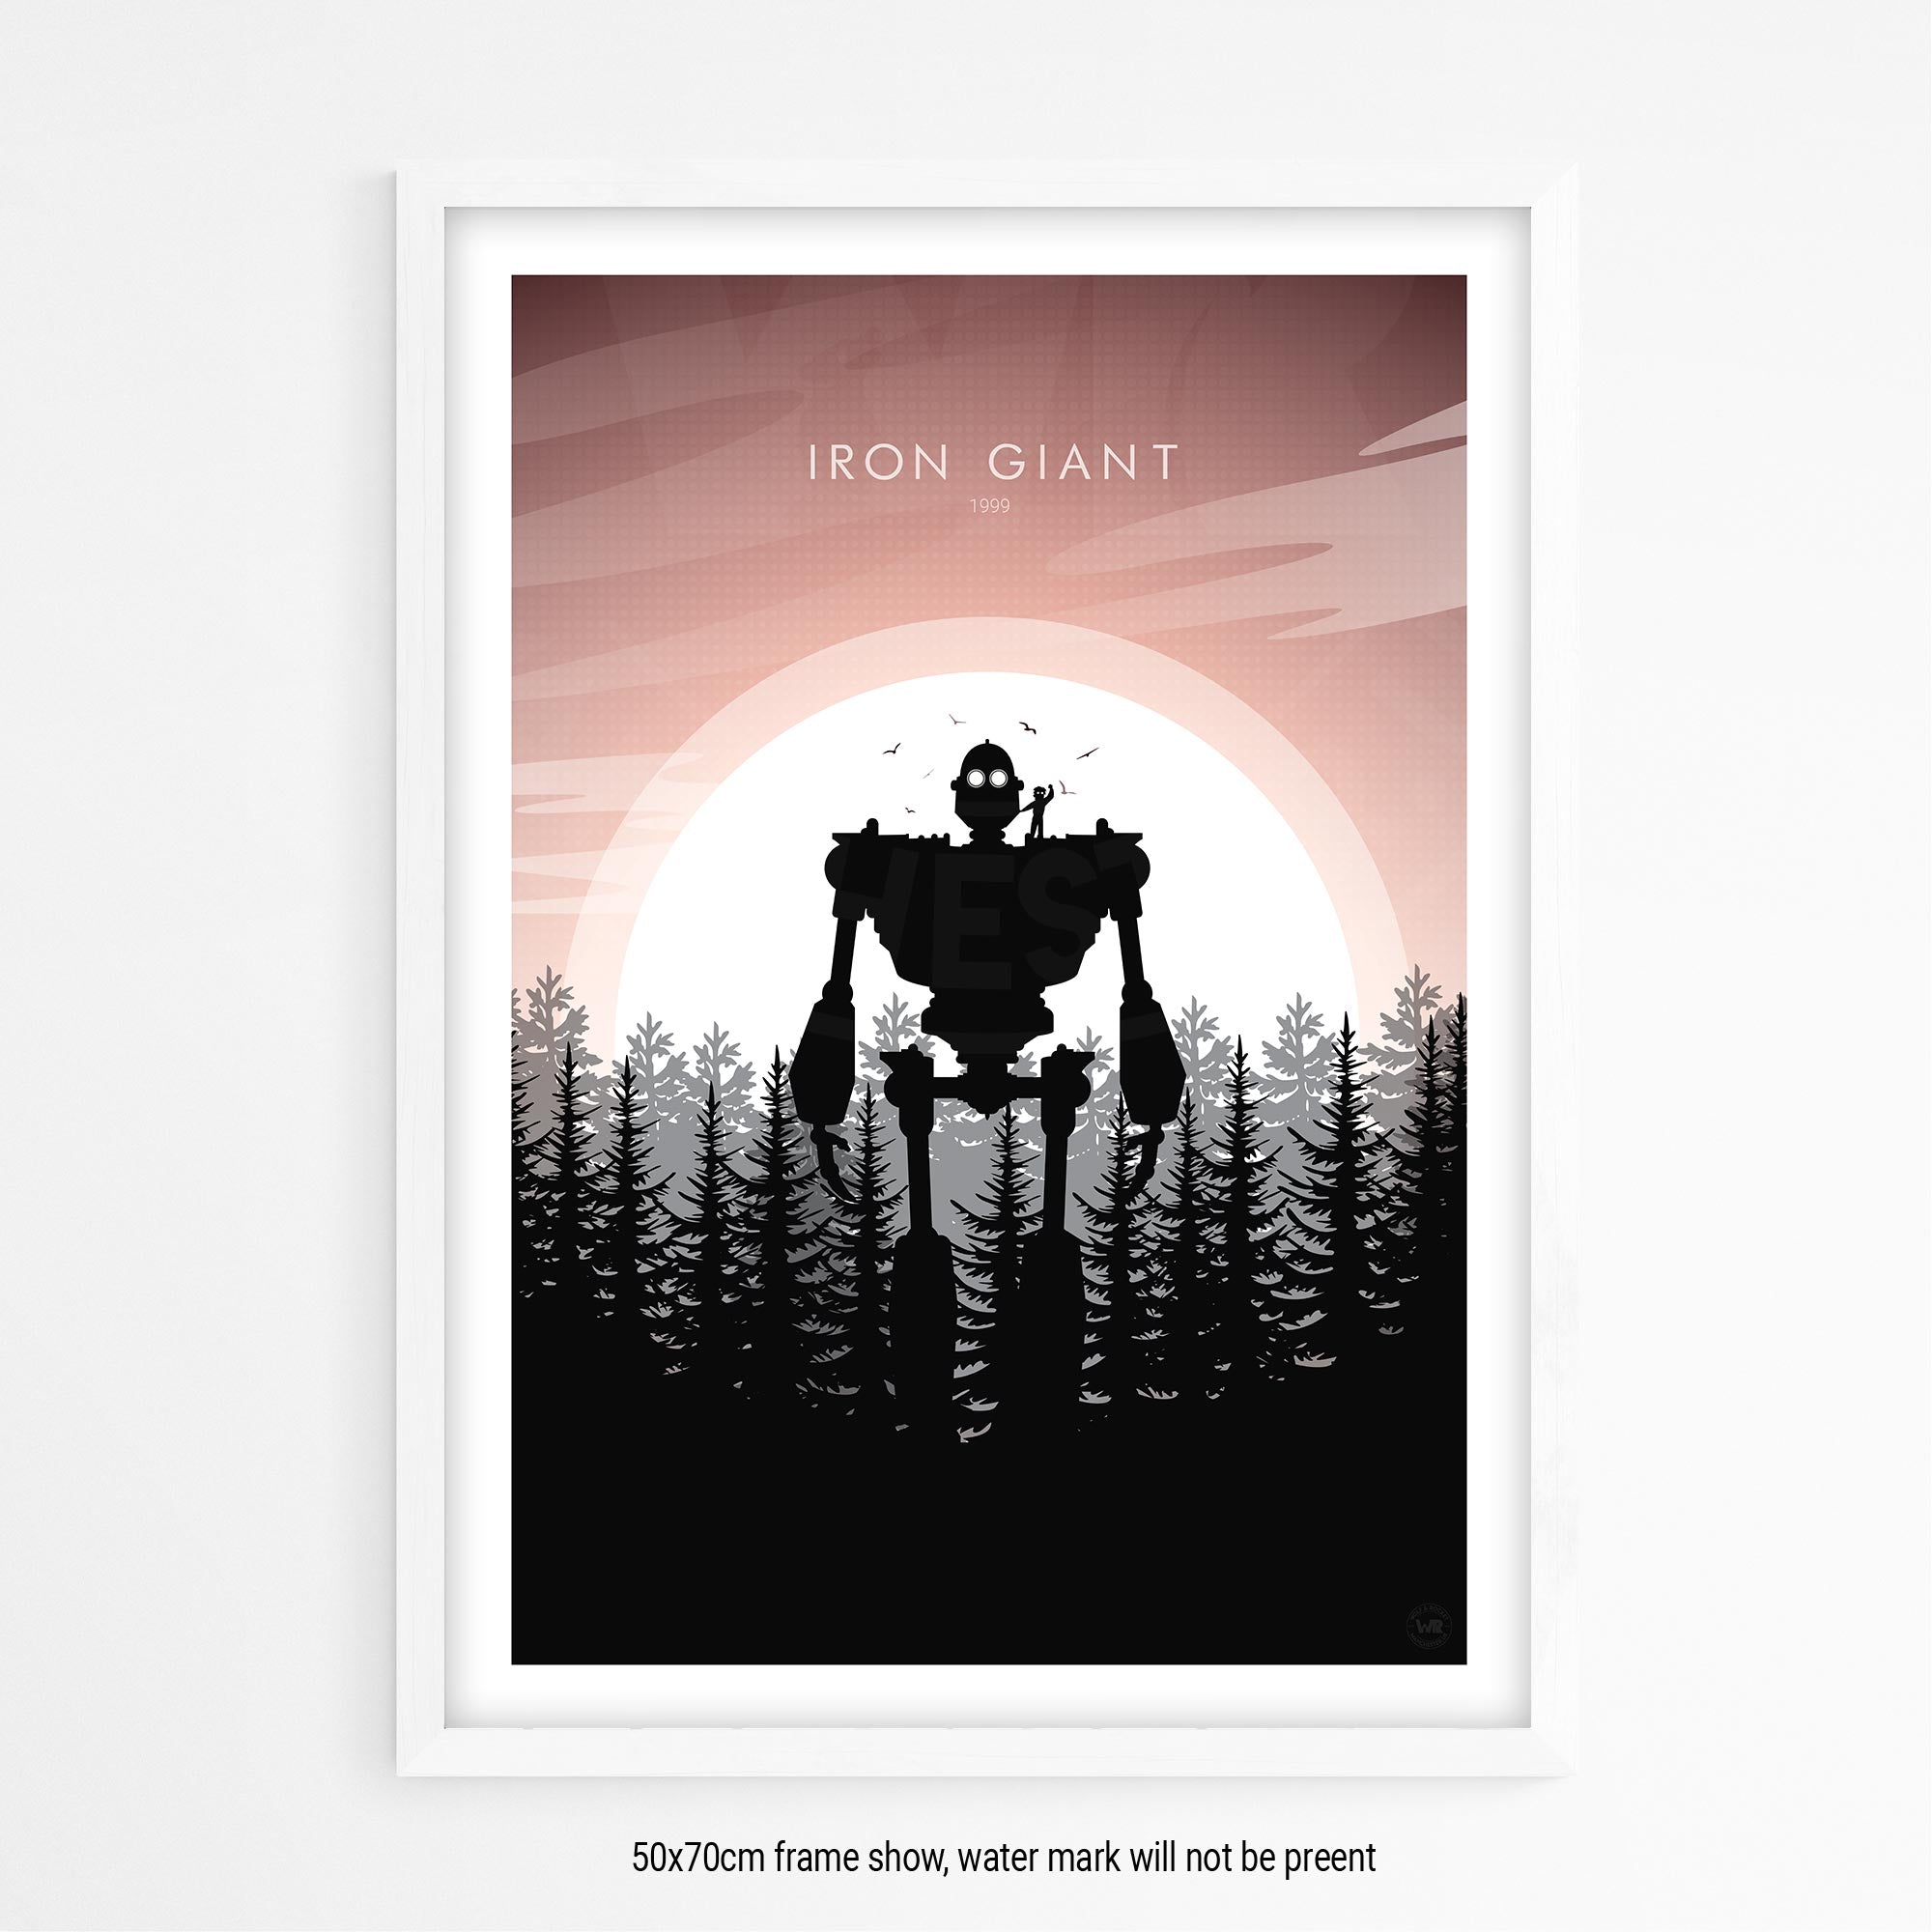 Iron Giant Movie Print - Wolf and Rocket